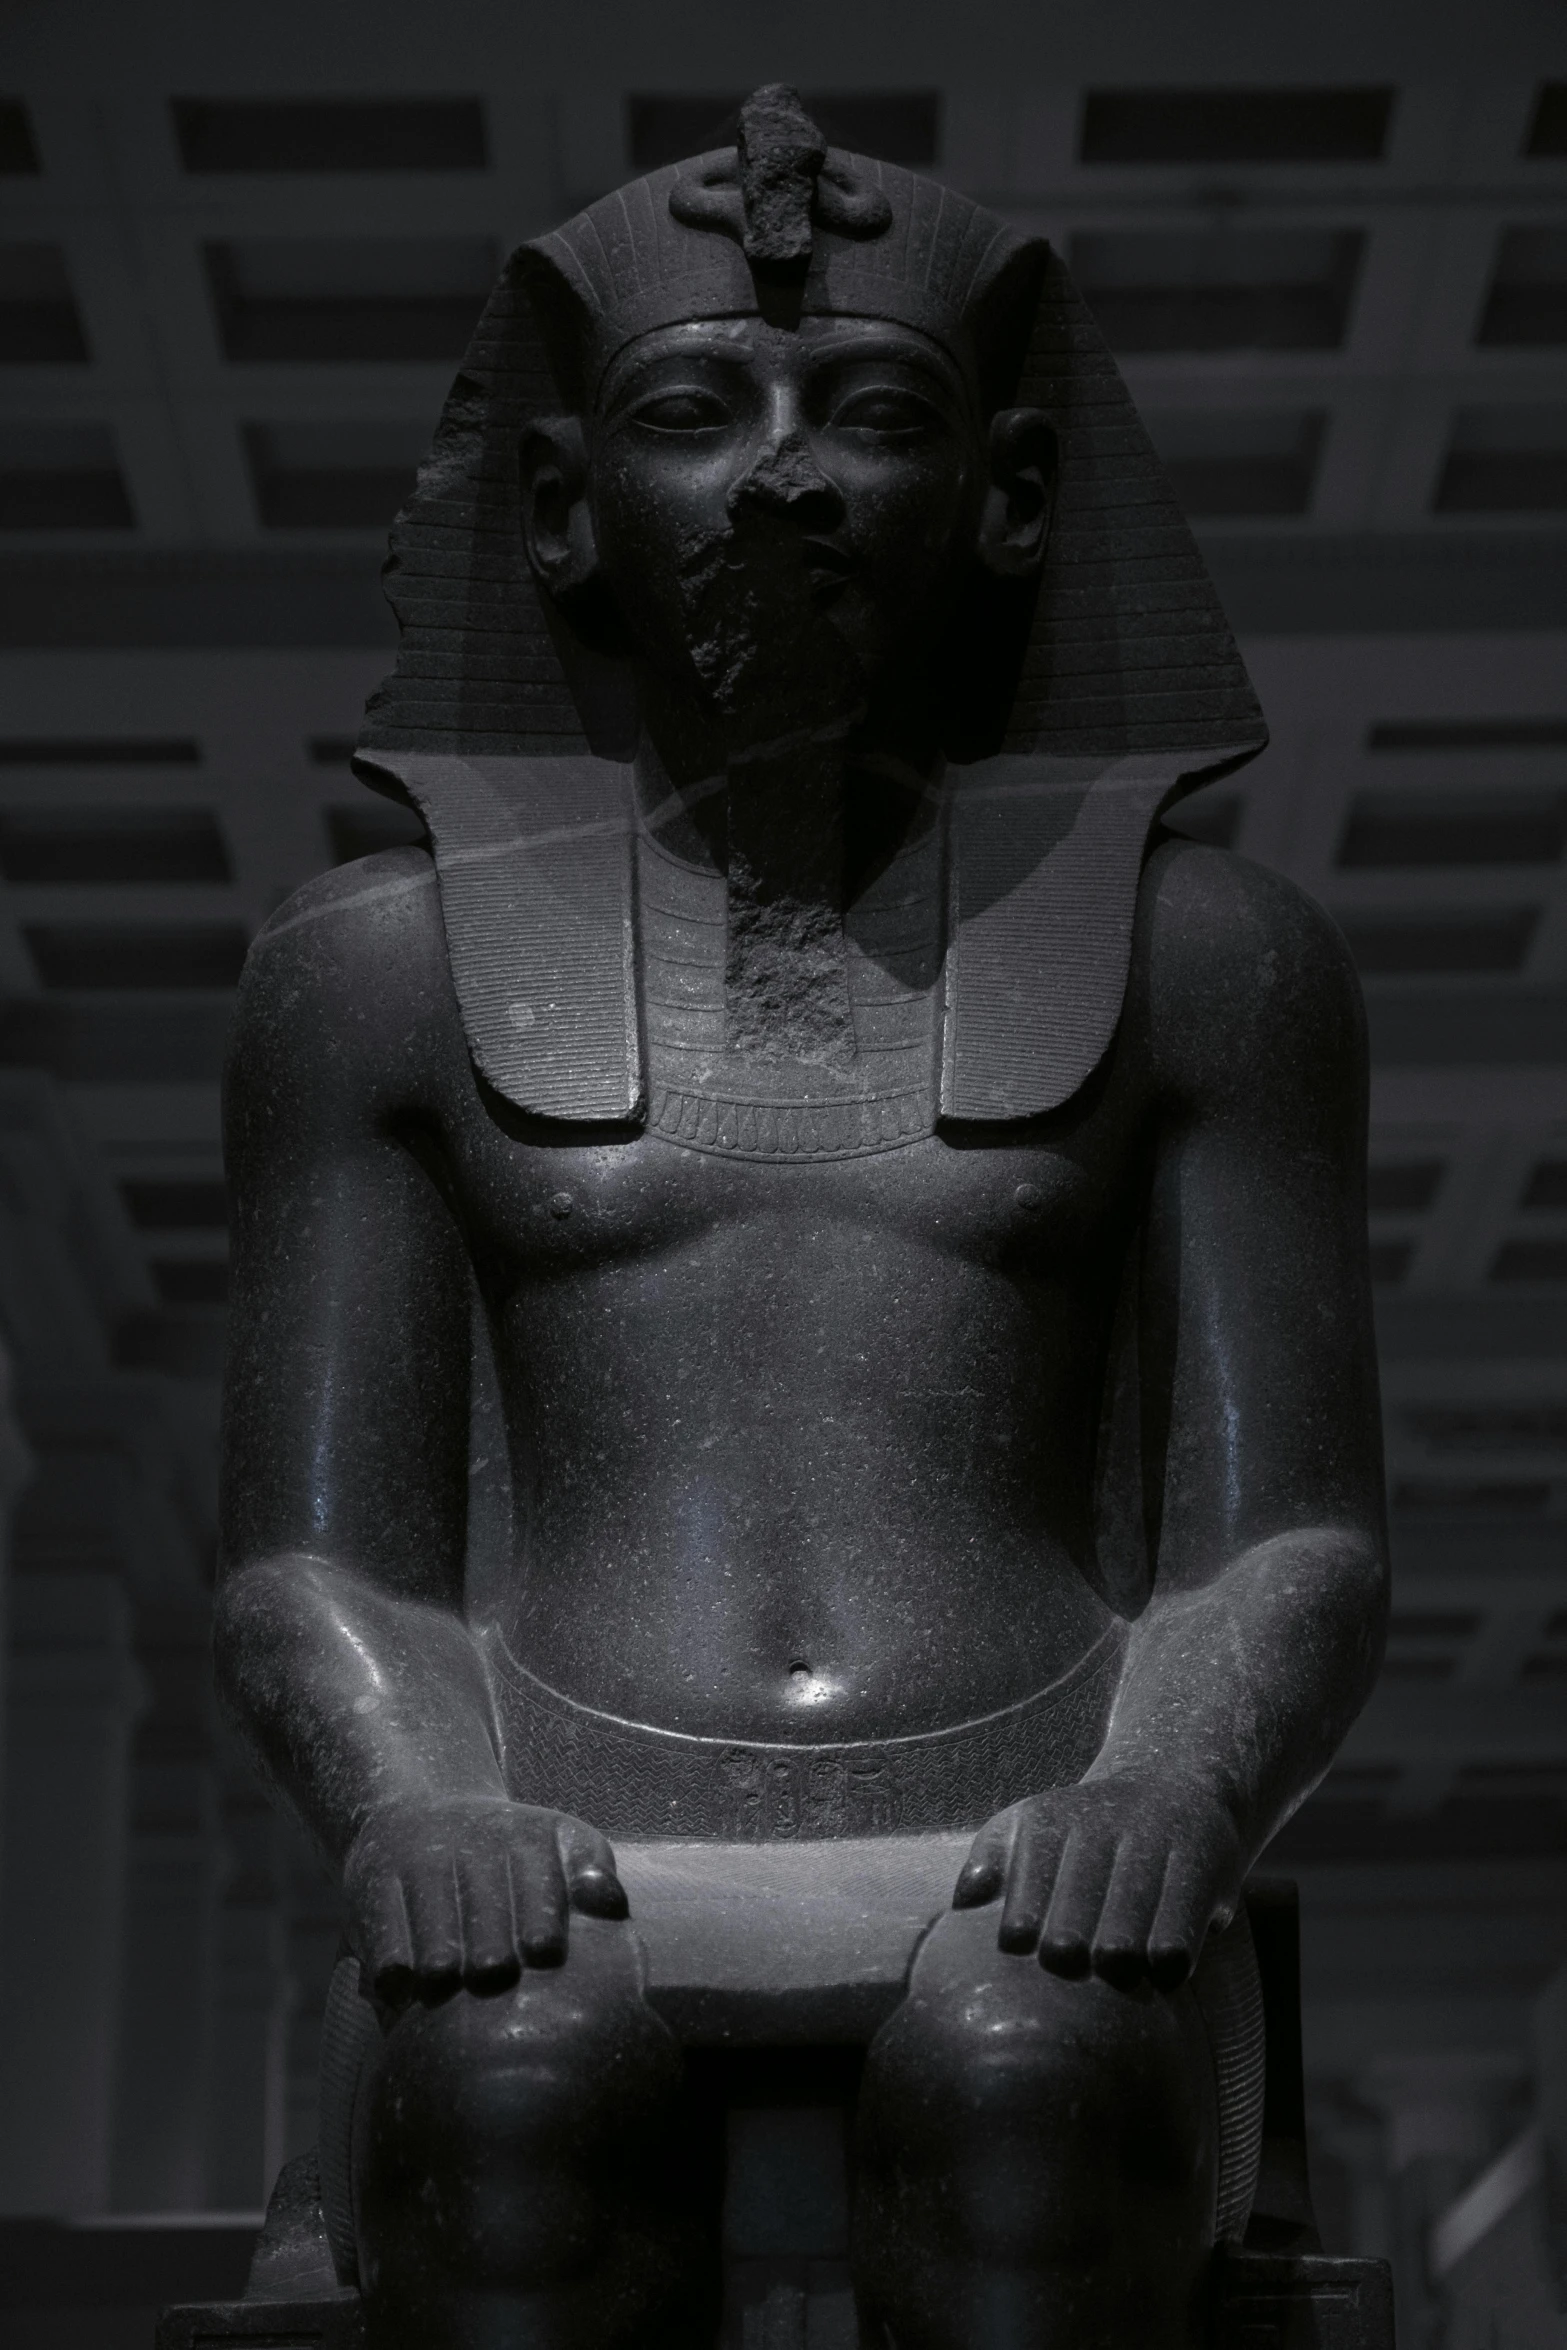 an image of an egyptian sculpture on display